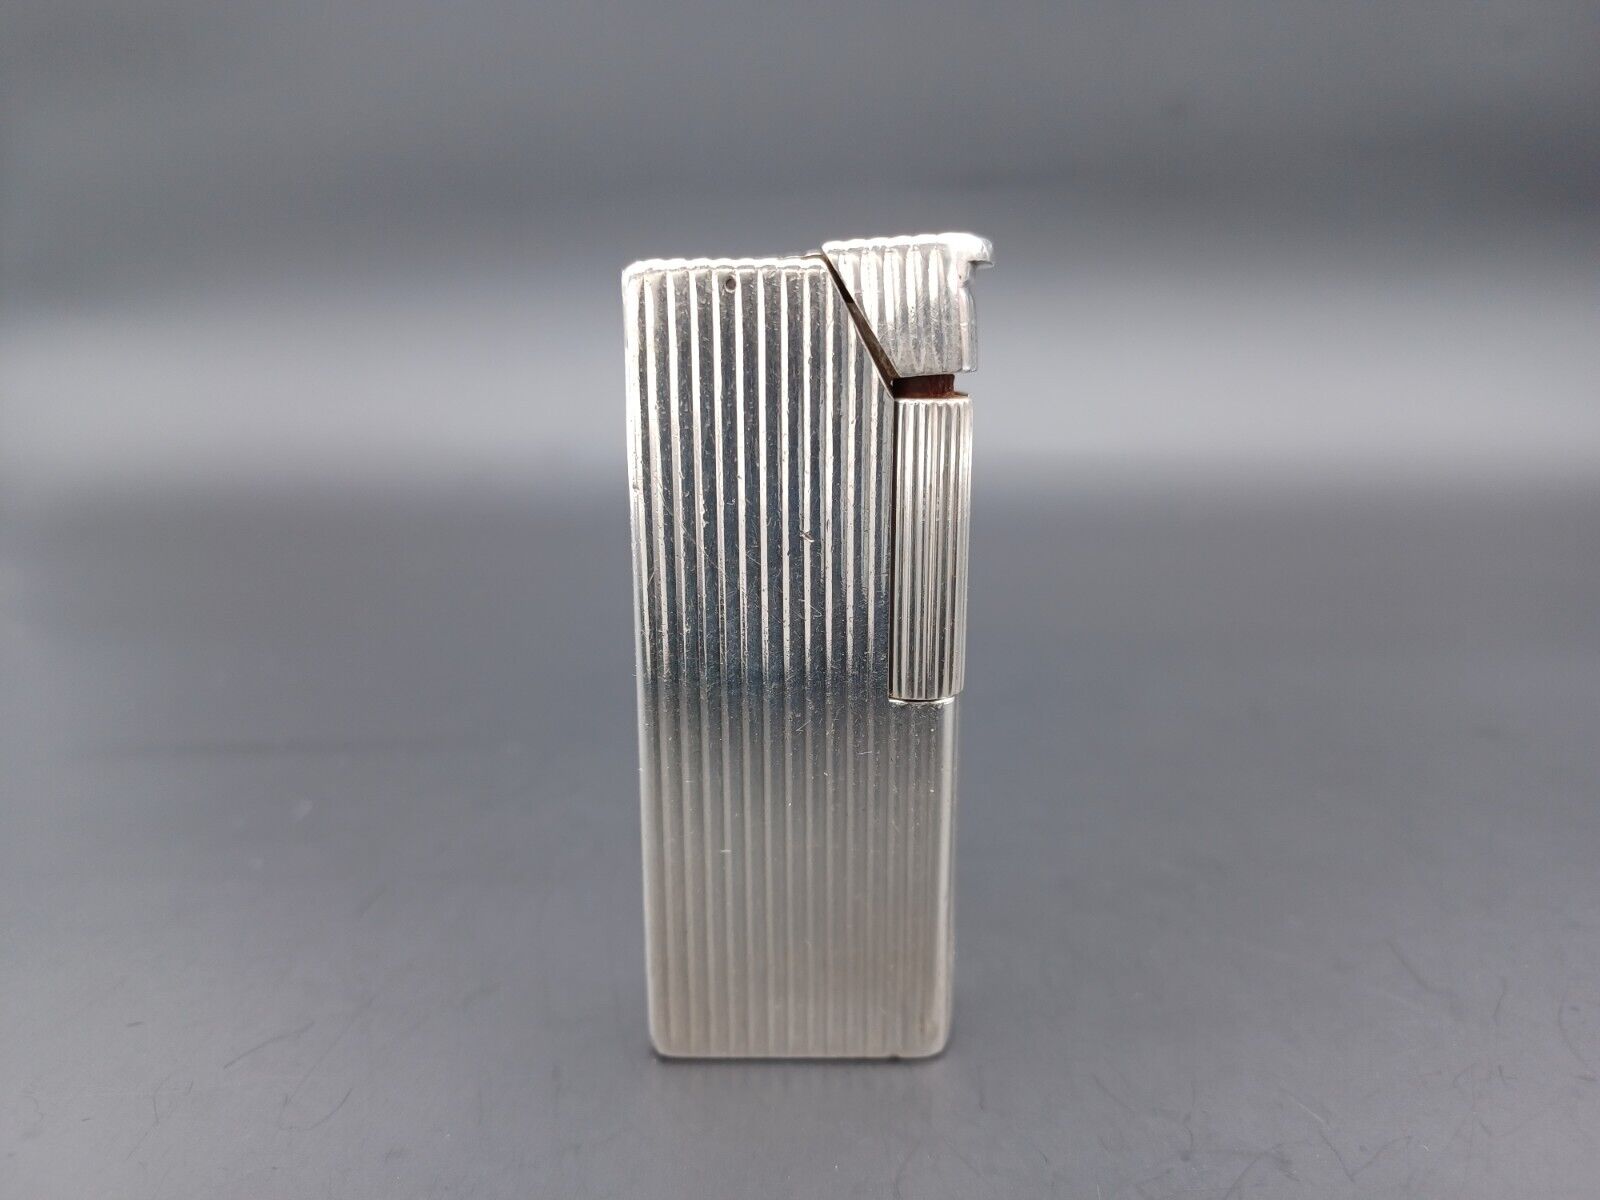 Rare Dunhill Aldunil Gas Lighter - Sterling Silver - Made In France - AM 17-0884